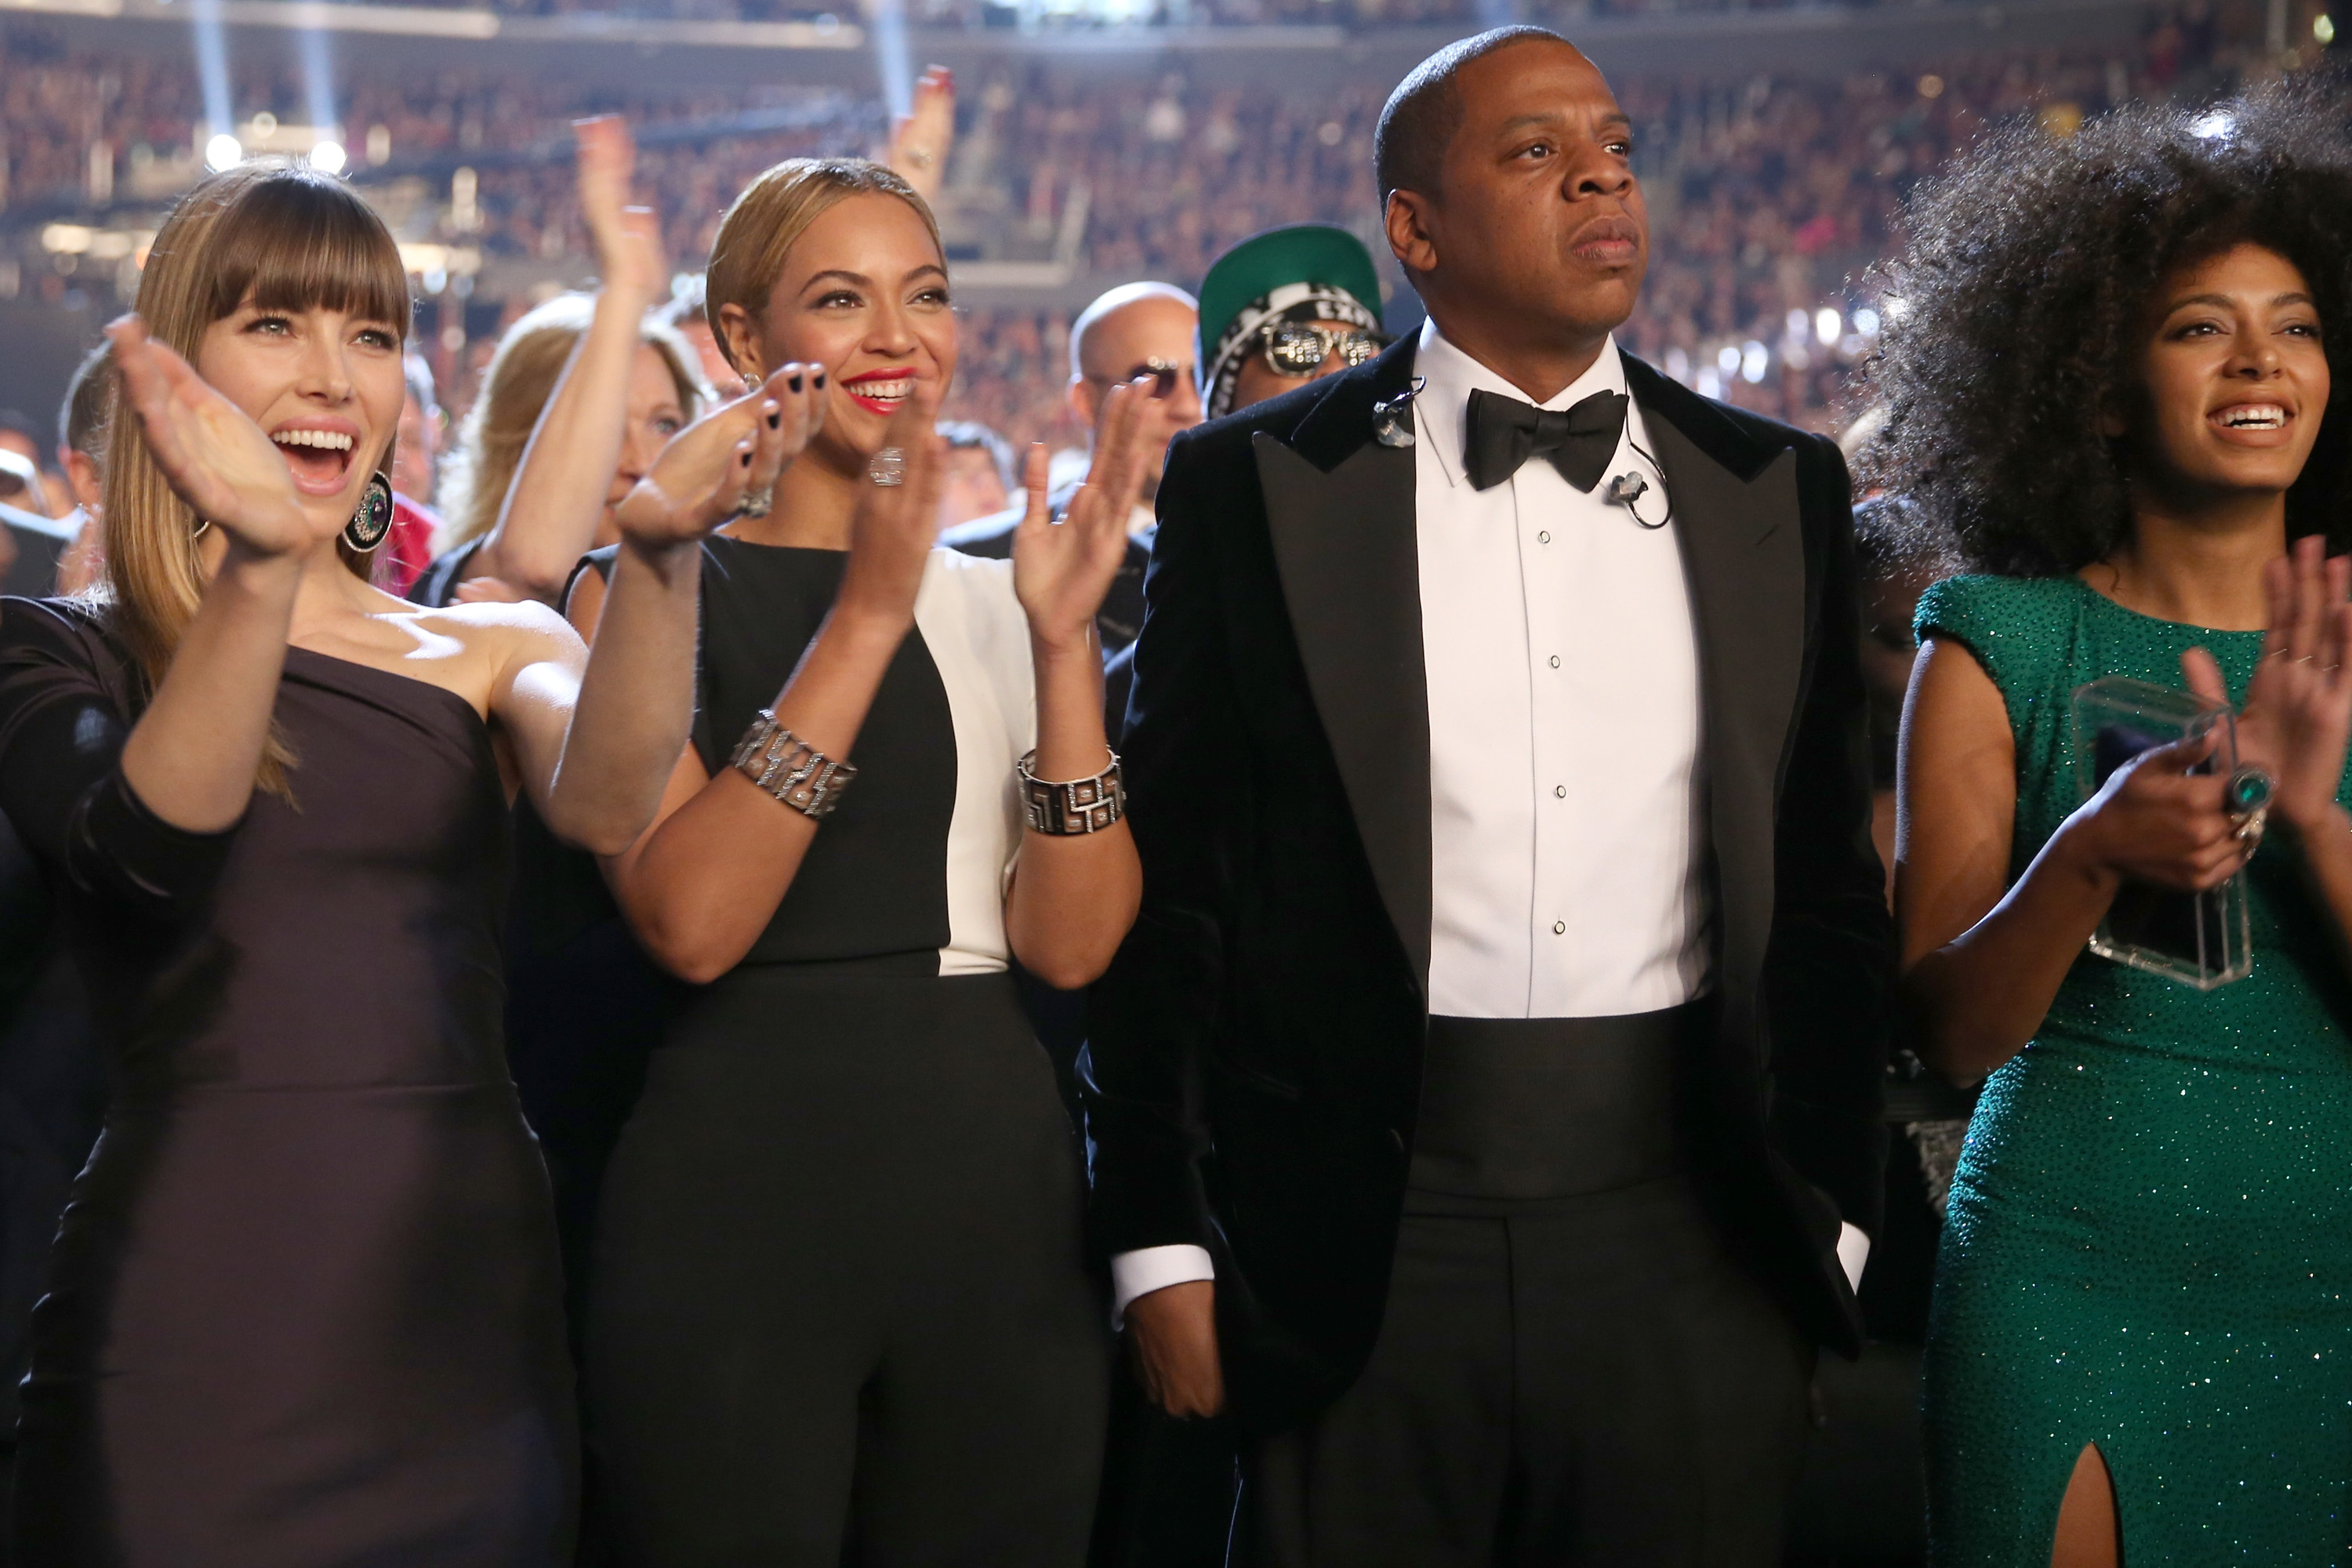 Jessica Biel, Beyoncé, Jay-Z, and Solange Knowles at the 55th Annual Grammy Awards, Staples Center, February 10, 2013, Los Angeles, California | Source: Getty Images